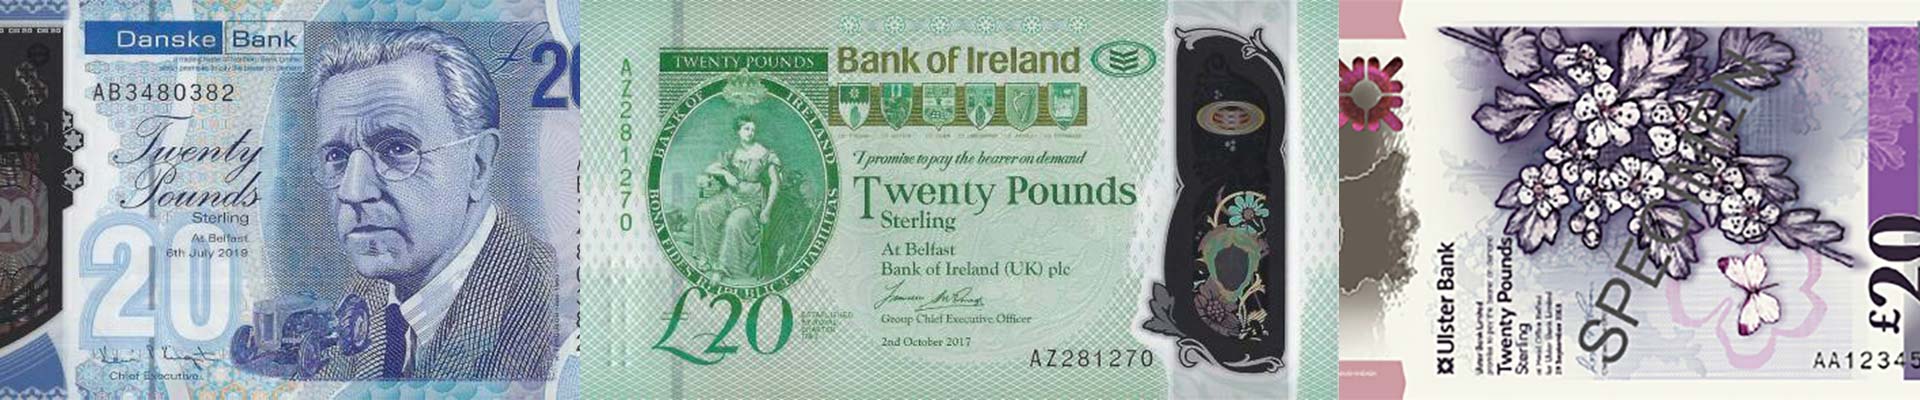 Bank of Ireland,Danske Bank and Ulster Bank to introduce polymer £20 note header image